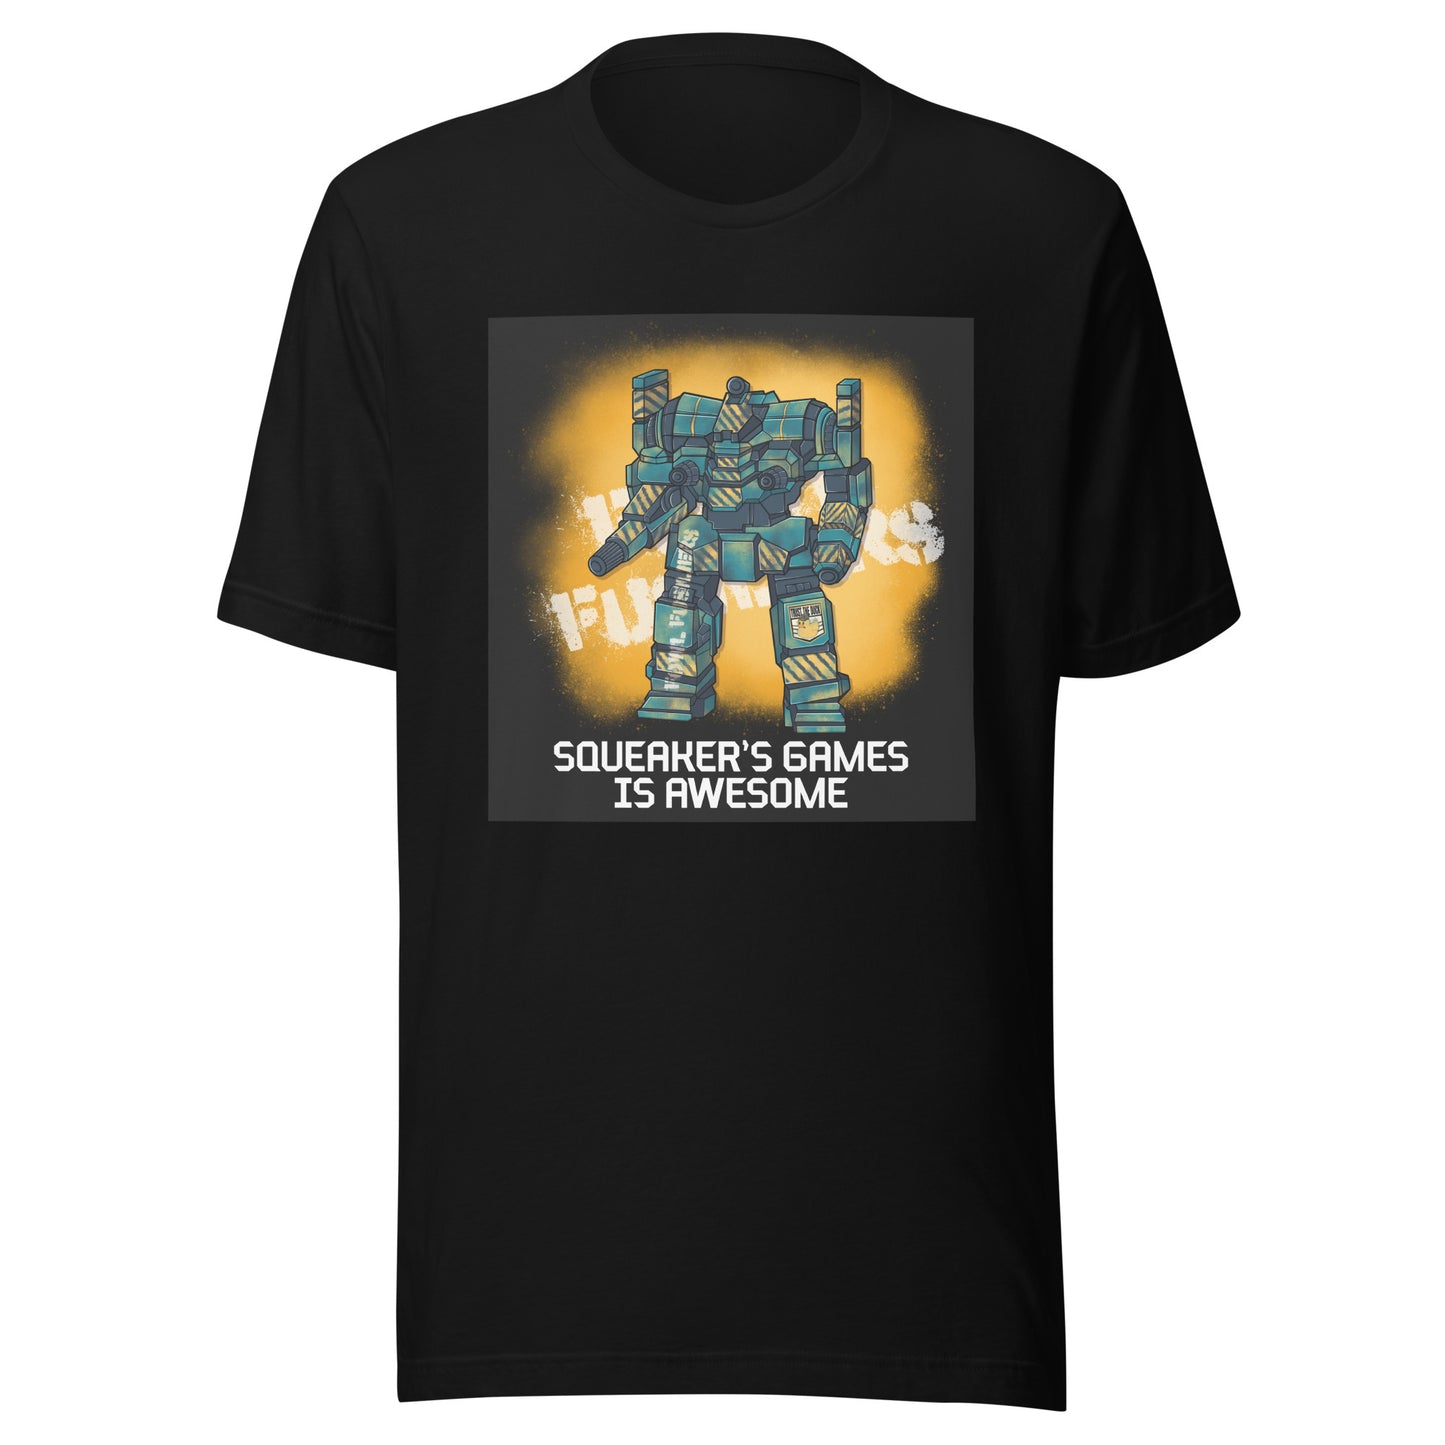 Squeakers Games is Awesome! Unisex t-shirt